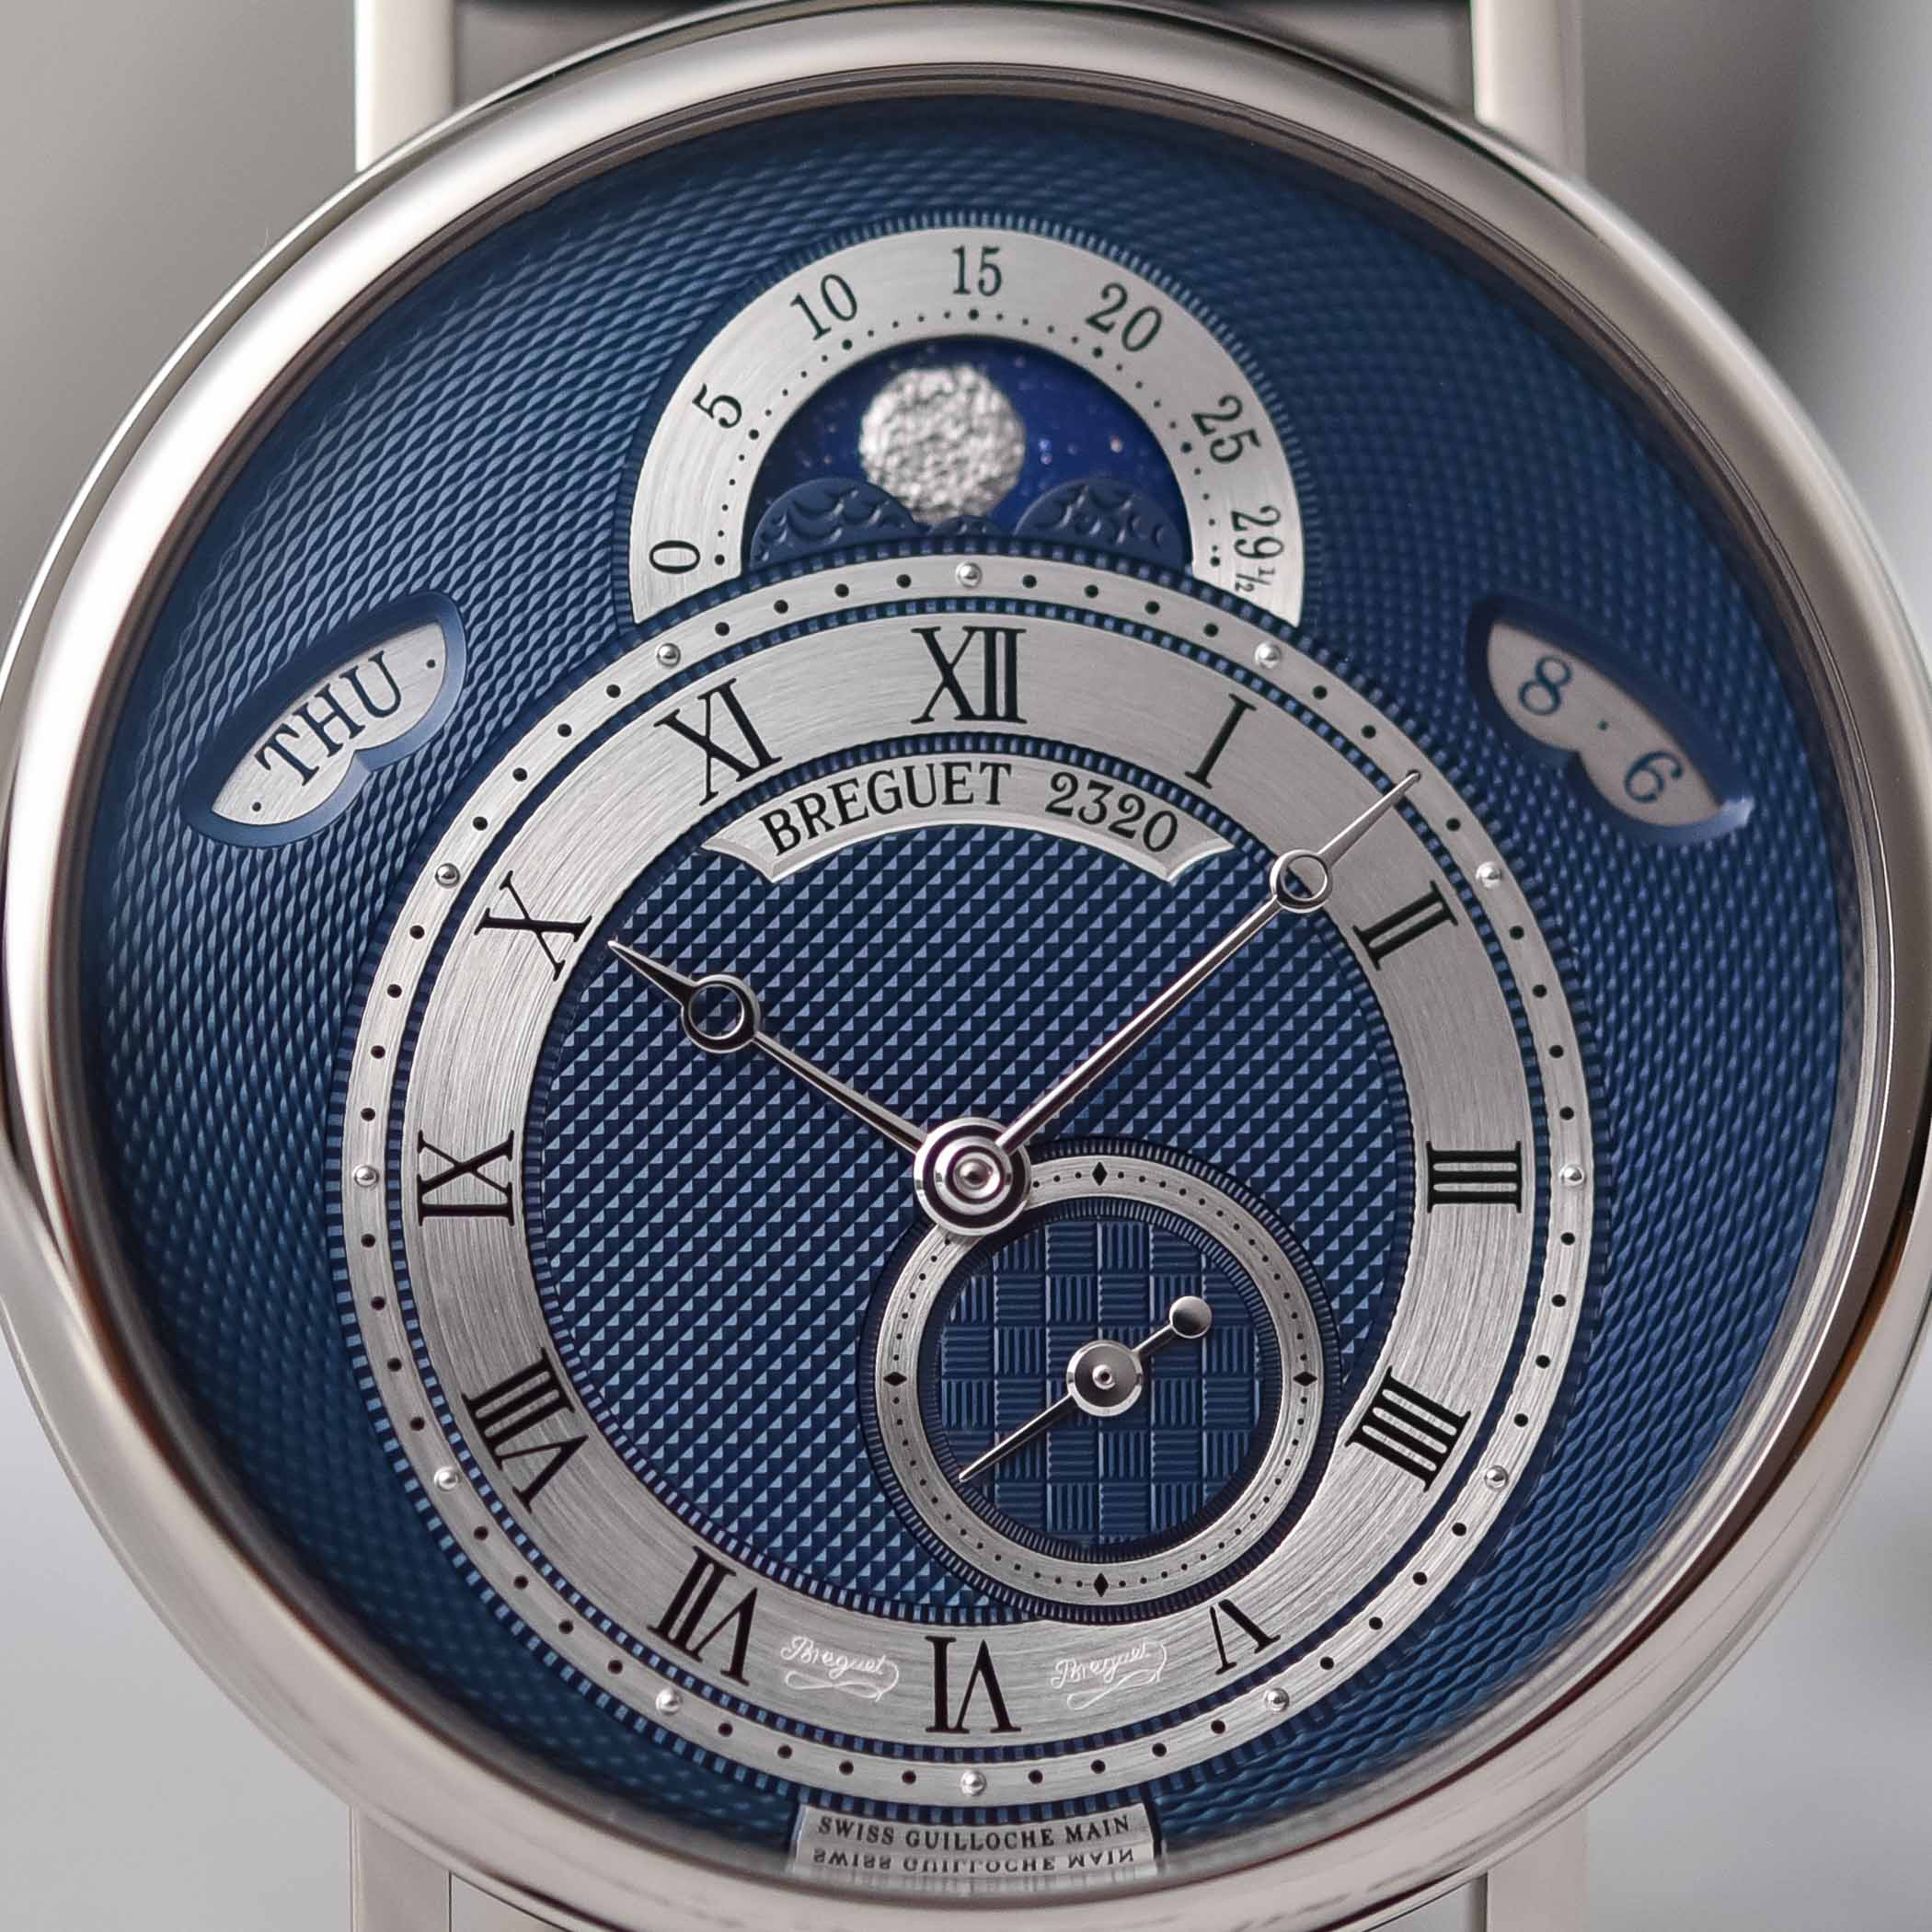 2020 Breguet Classique 7337 Moon and Calendar Chinoise White gold blue dial